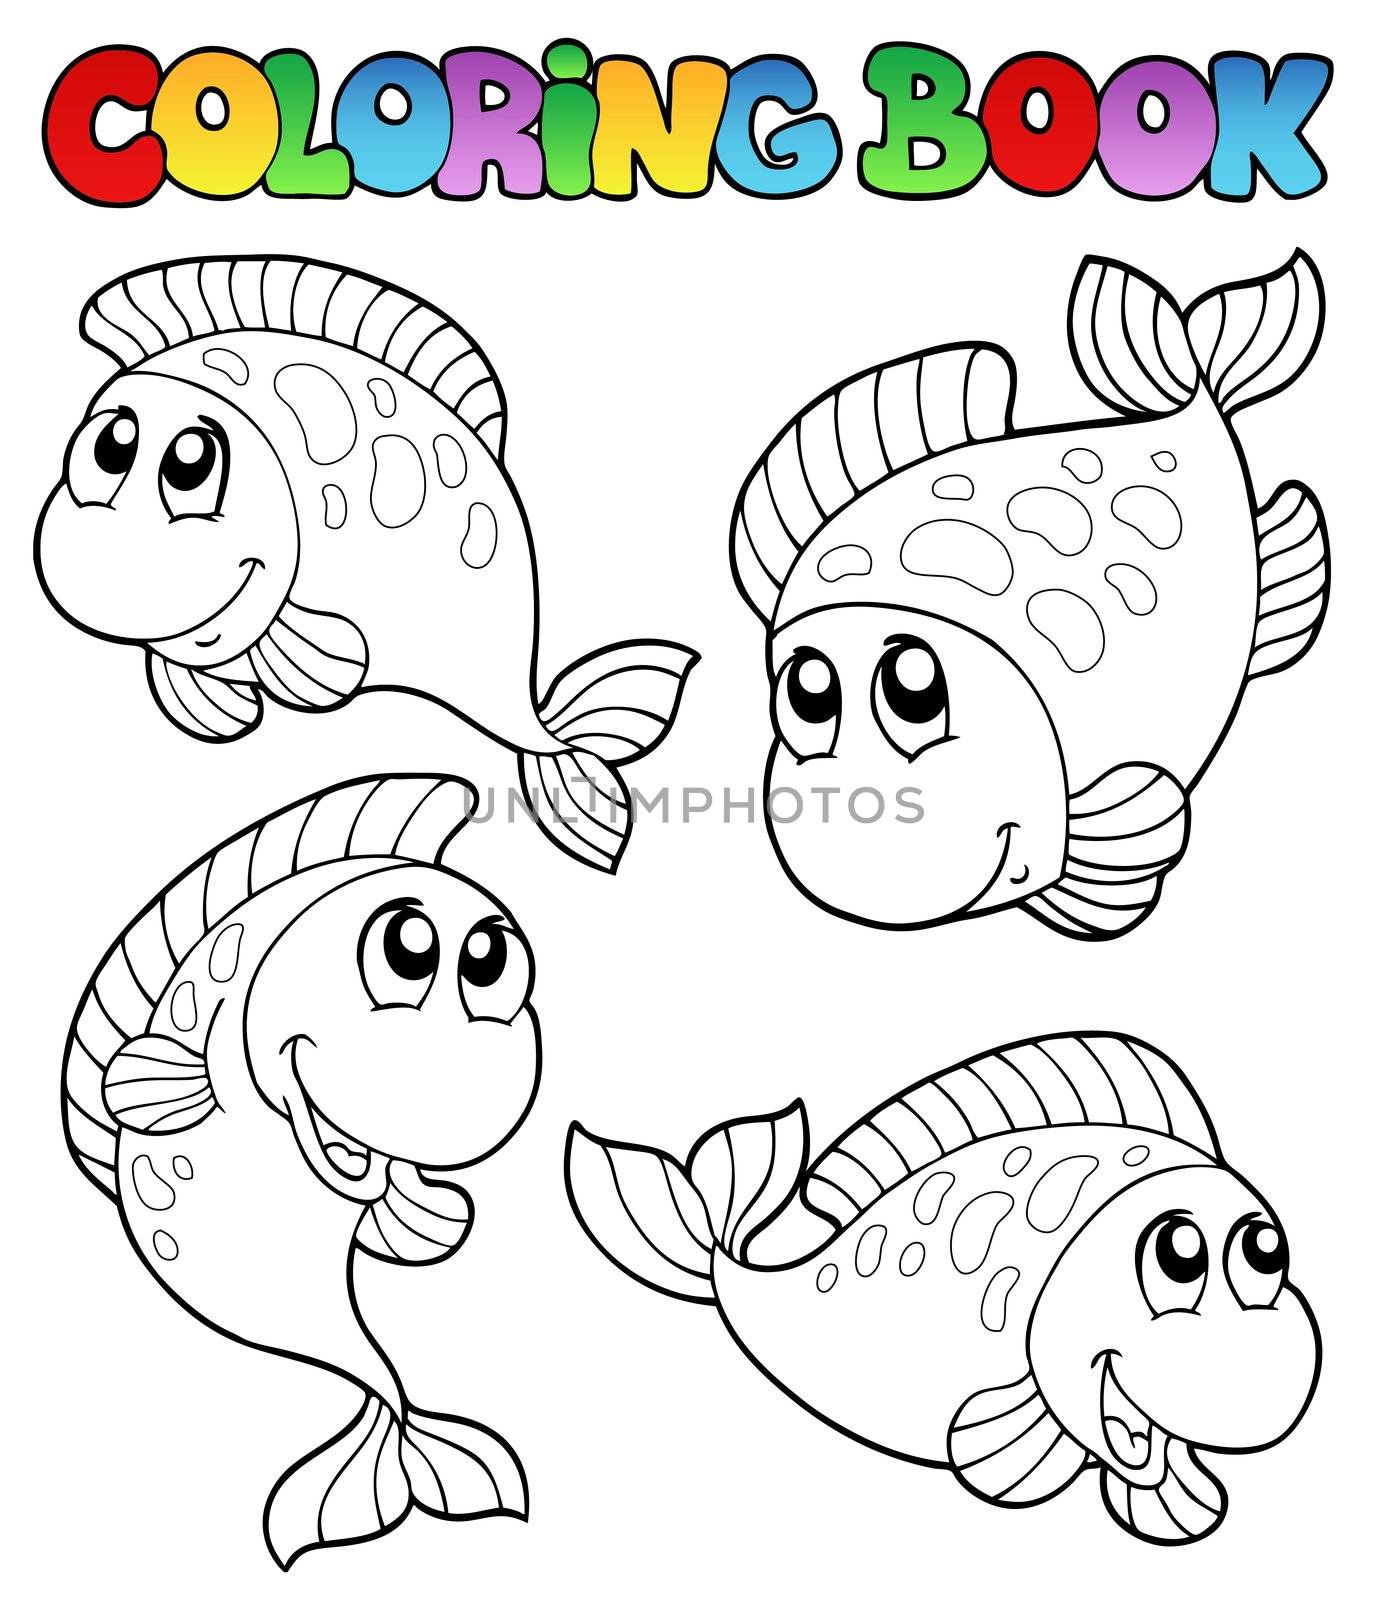 Coloring book with four fishes by clairev